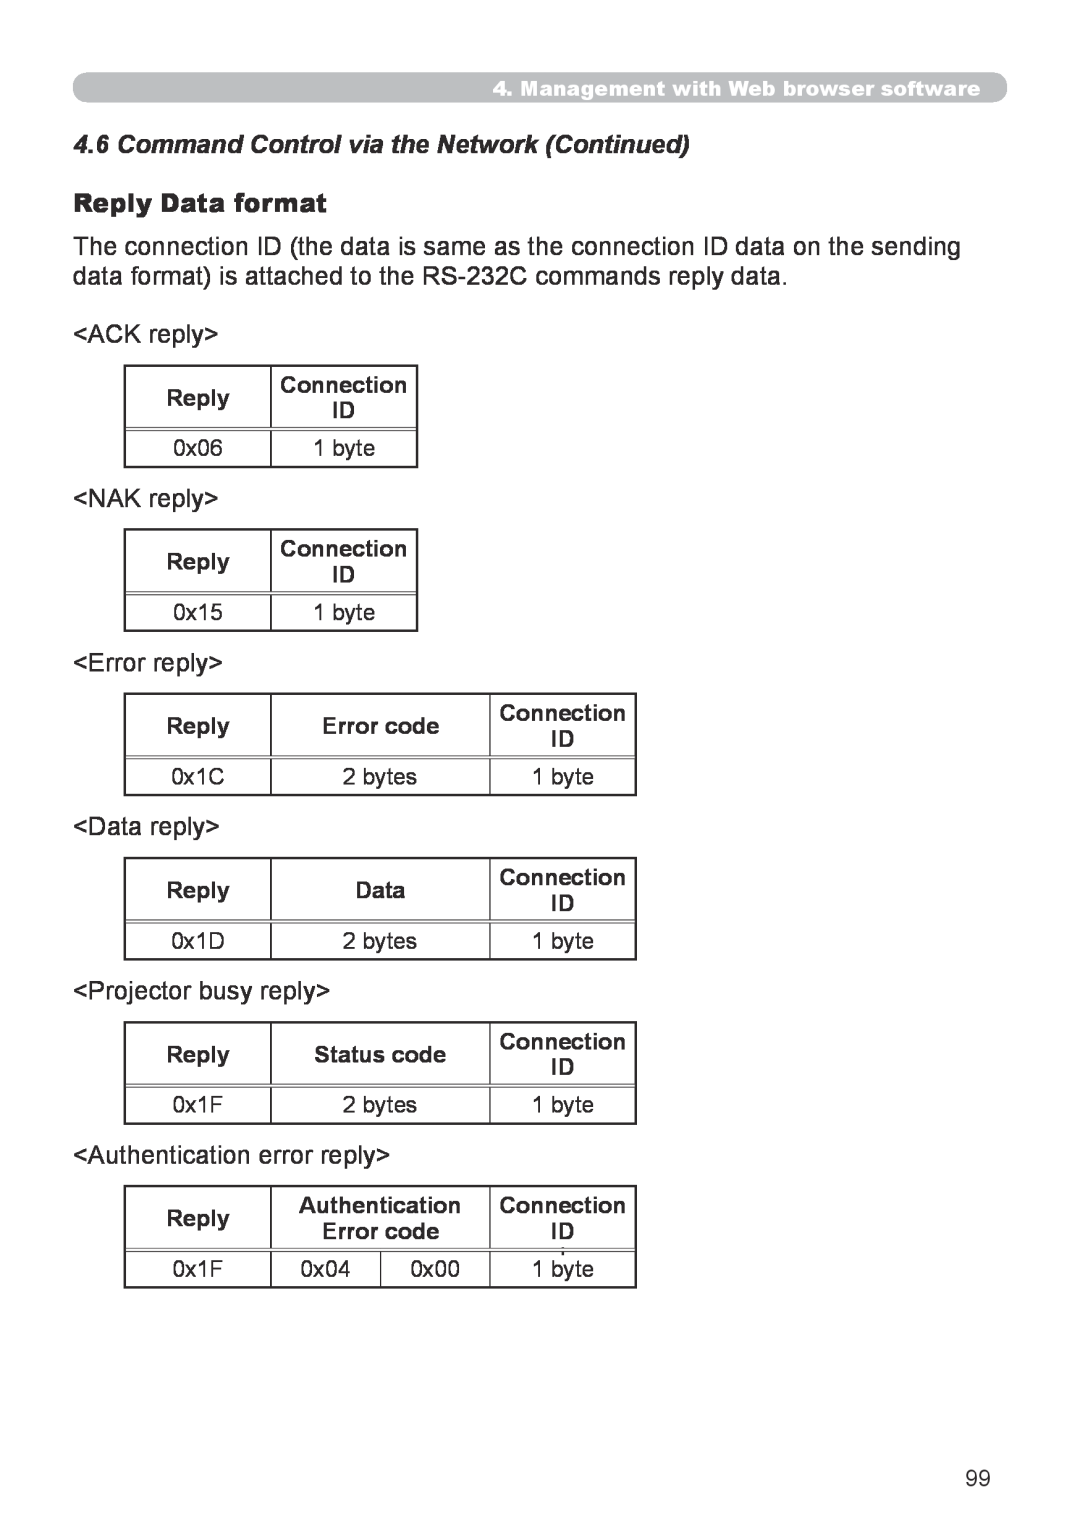 Hitachi CP-X267 user manual Reply Data format, 4.6Command Control via the Network Continued 